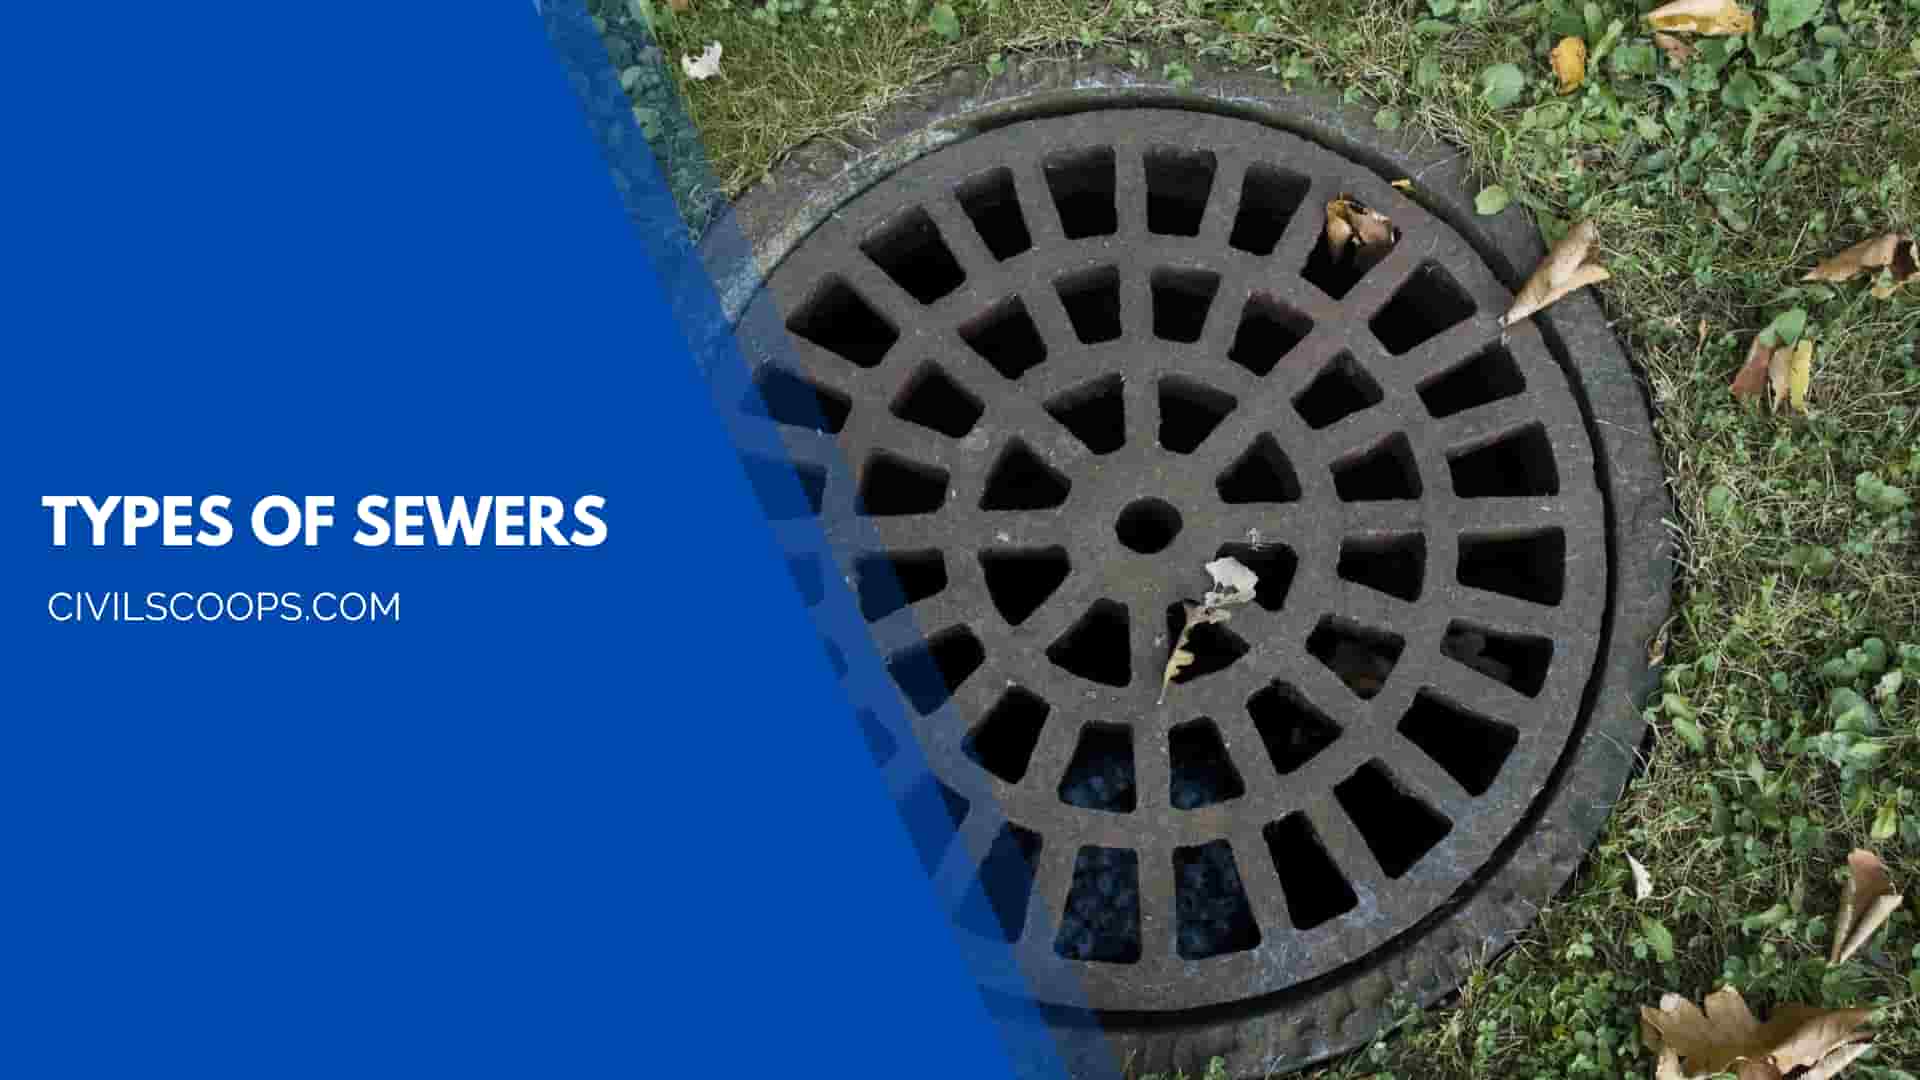 Types of Sewers